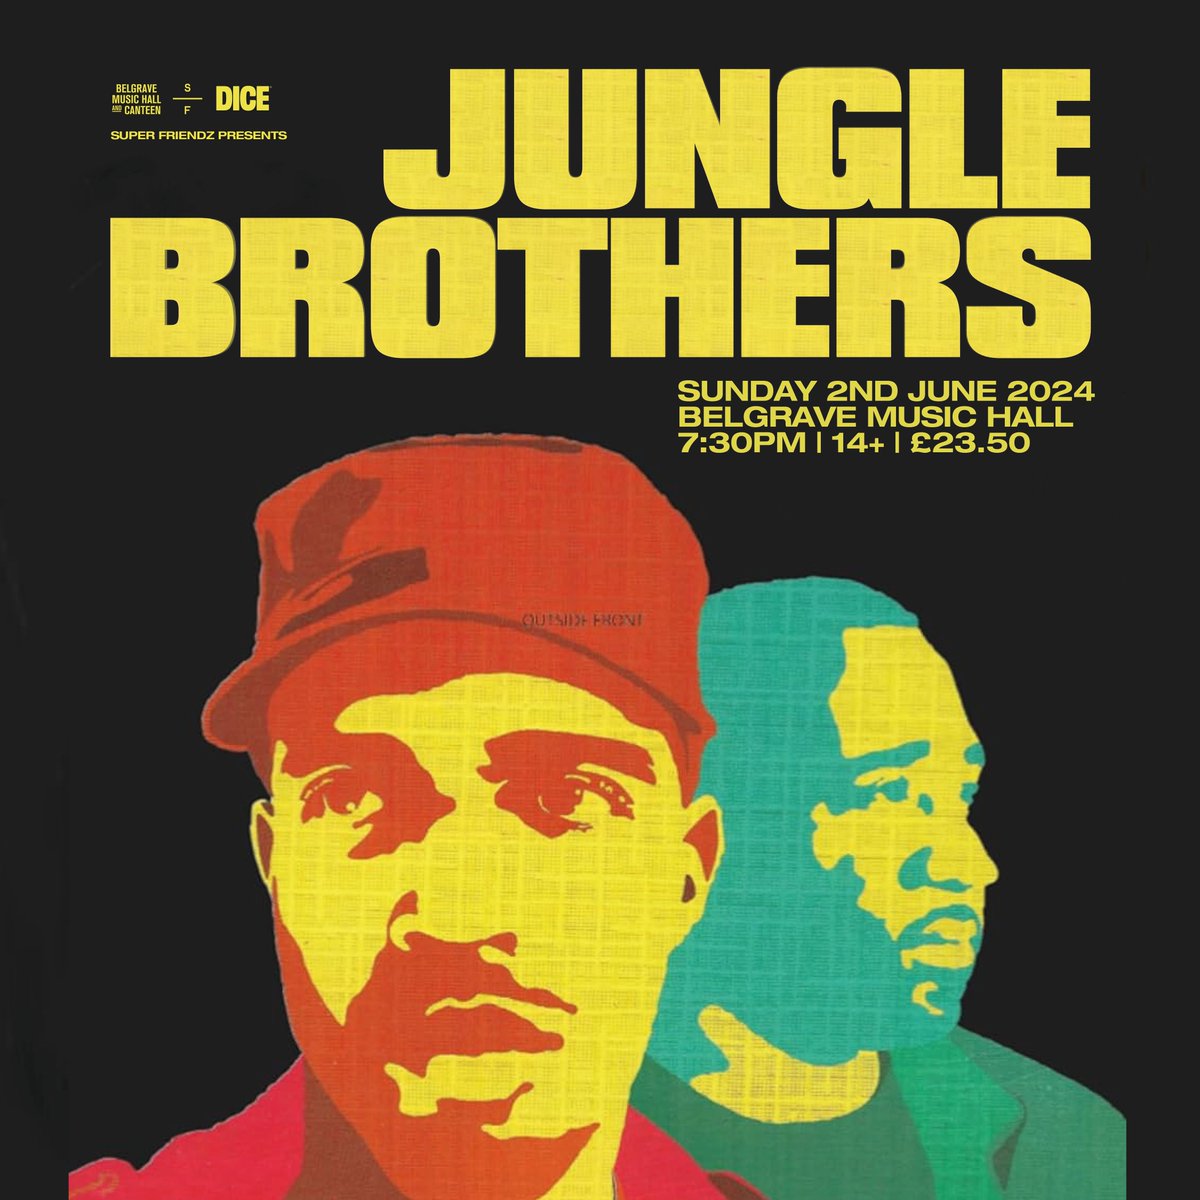 Just announced! Hip-hop trio @JungleBros4Life play The Music Hall this Summer 👏 Tickets on sale now, visit @dicefm for yours! buff.ly/4aTTT8n